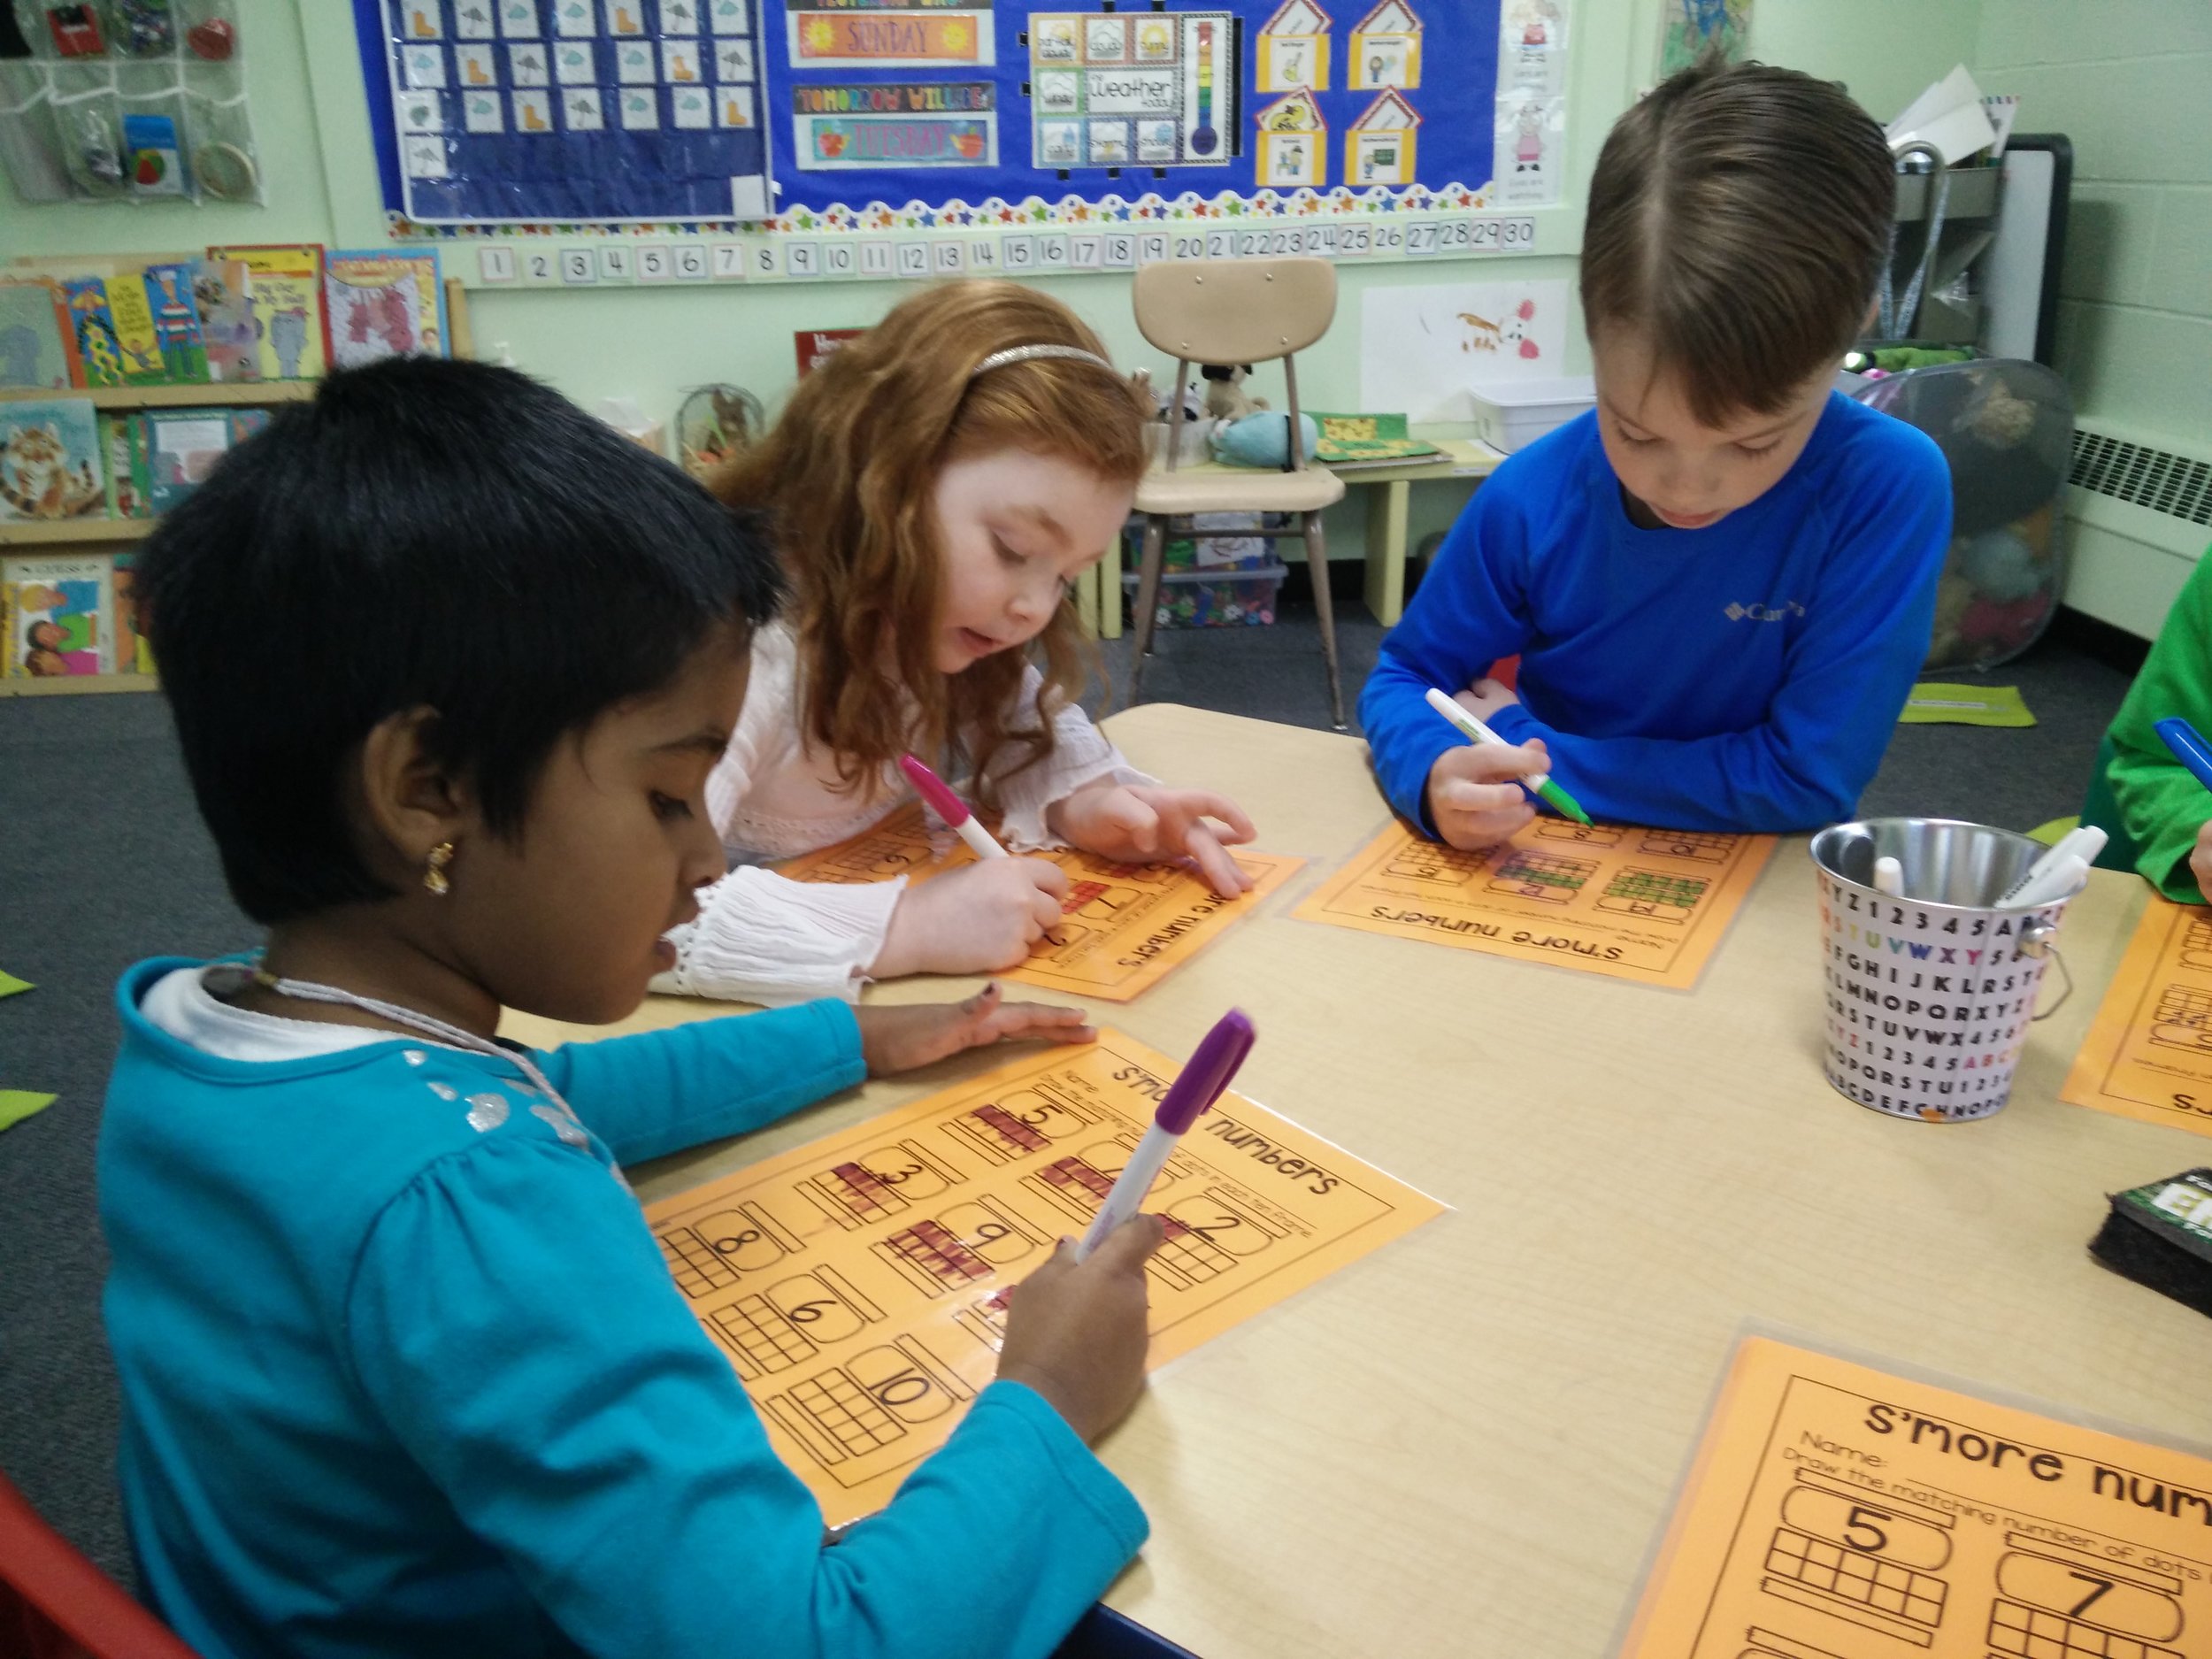  All of our pre-K students spend a portion of every day working on letter and number recognition and formation, emergent reading skills, and early math skills that will prepare them for success in Kindergarten and beyond.  